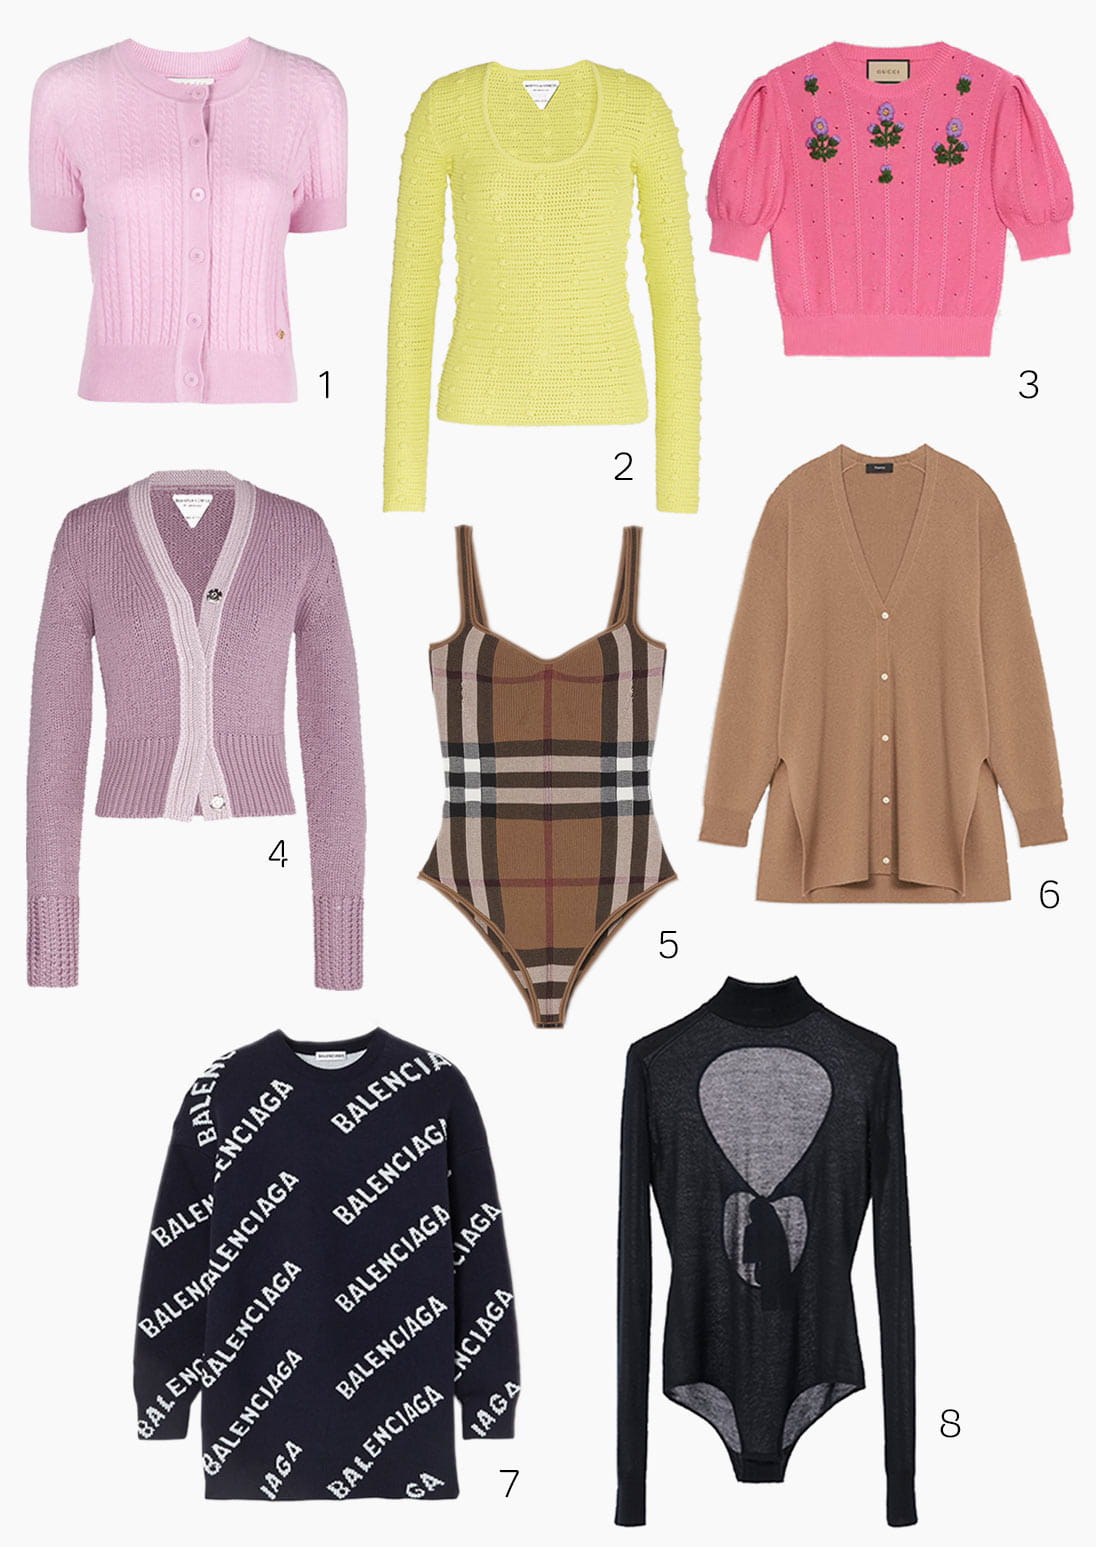 Fashion influencer Tasha Lam's picks of Autumn knitwear available at Pacific Place